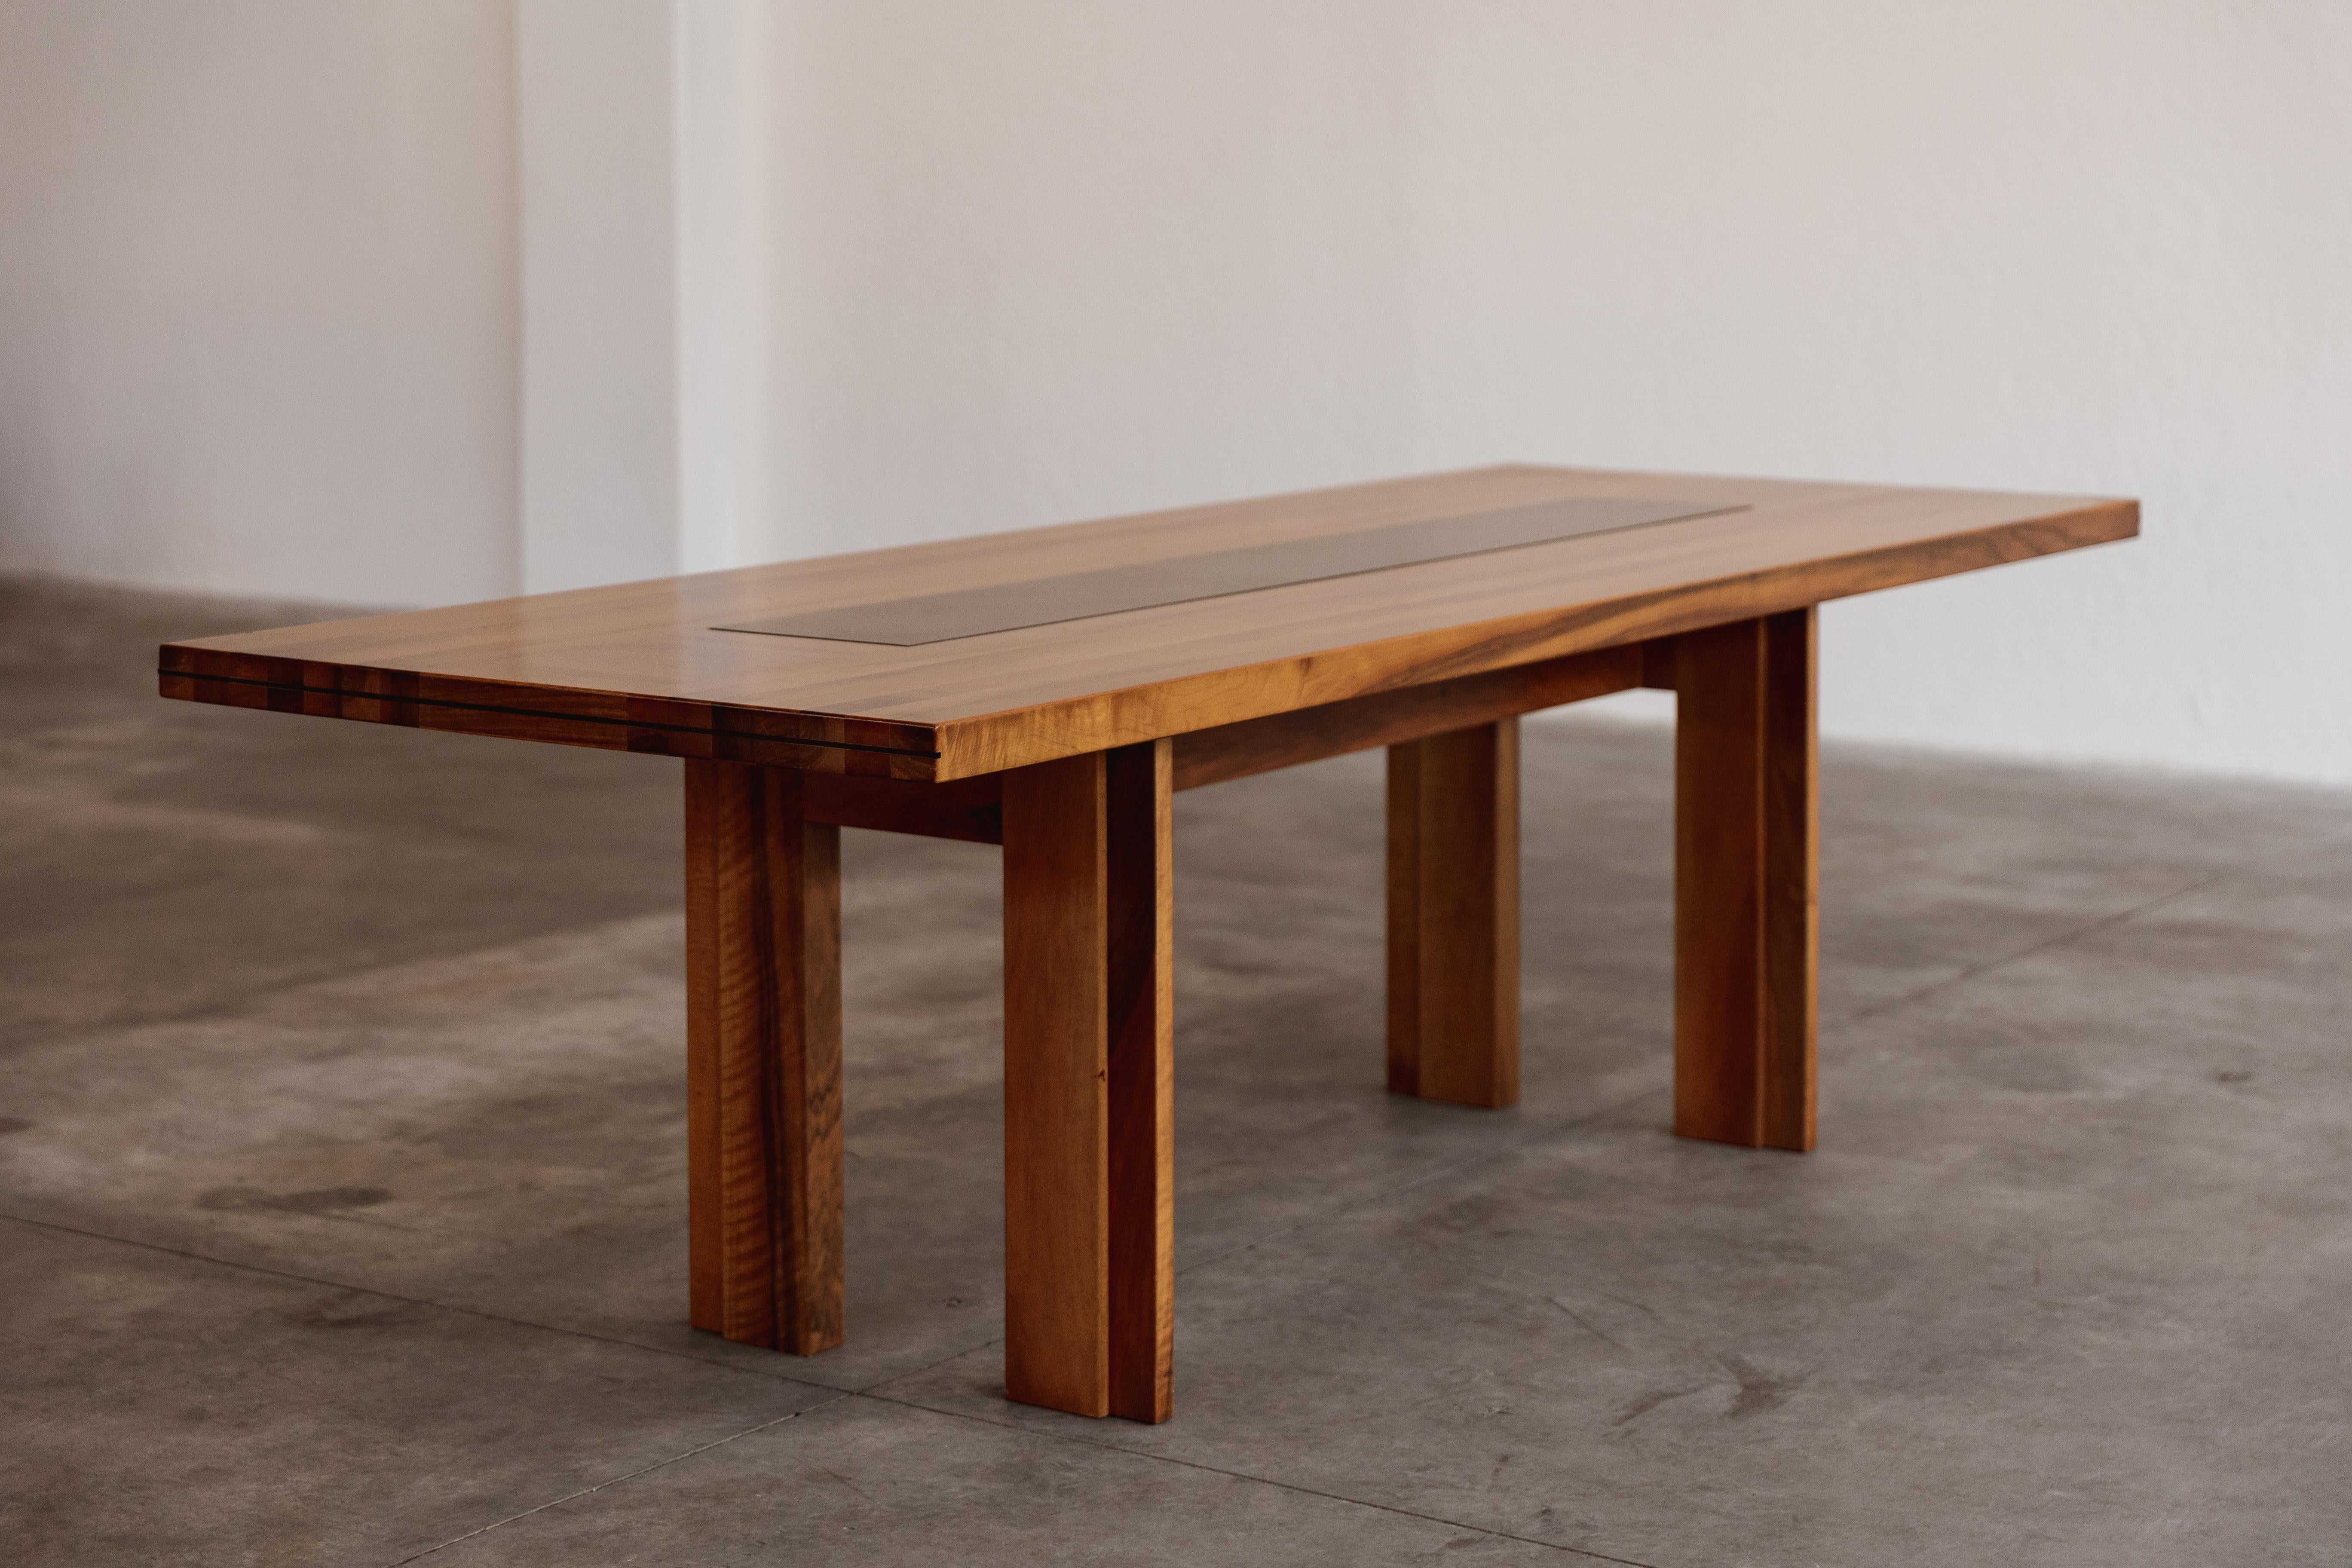 Afra & Tobia Scarpa wooden dining table for Cassina, marble and walnut, Italy, 1970s.

Following the typical Scarpas style, this dining table was manufactured by Cassina in the 1970s. The structure boasts a pronounced texture, highlighting